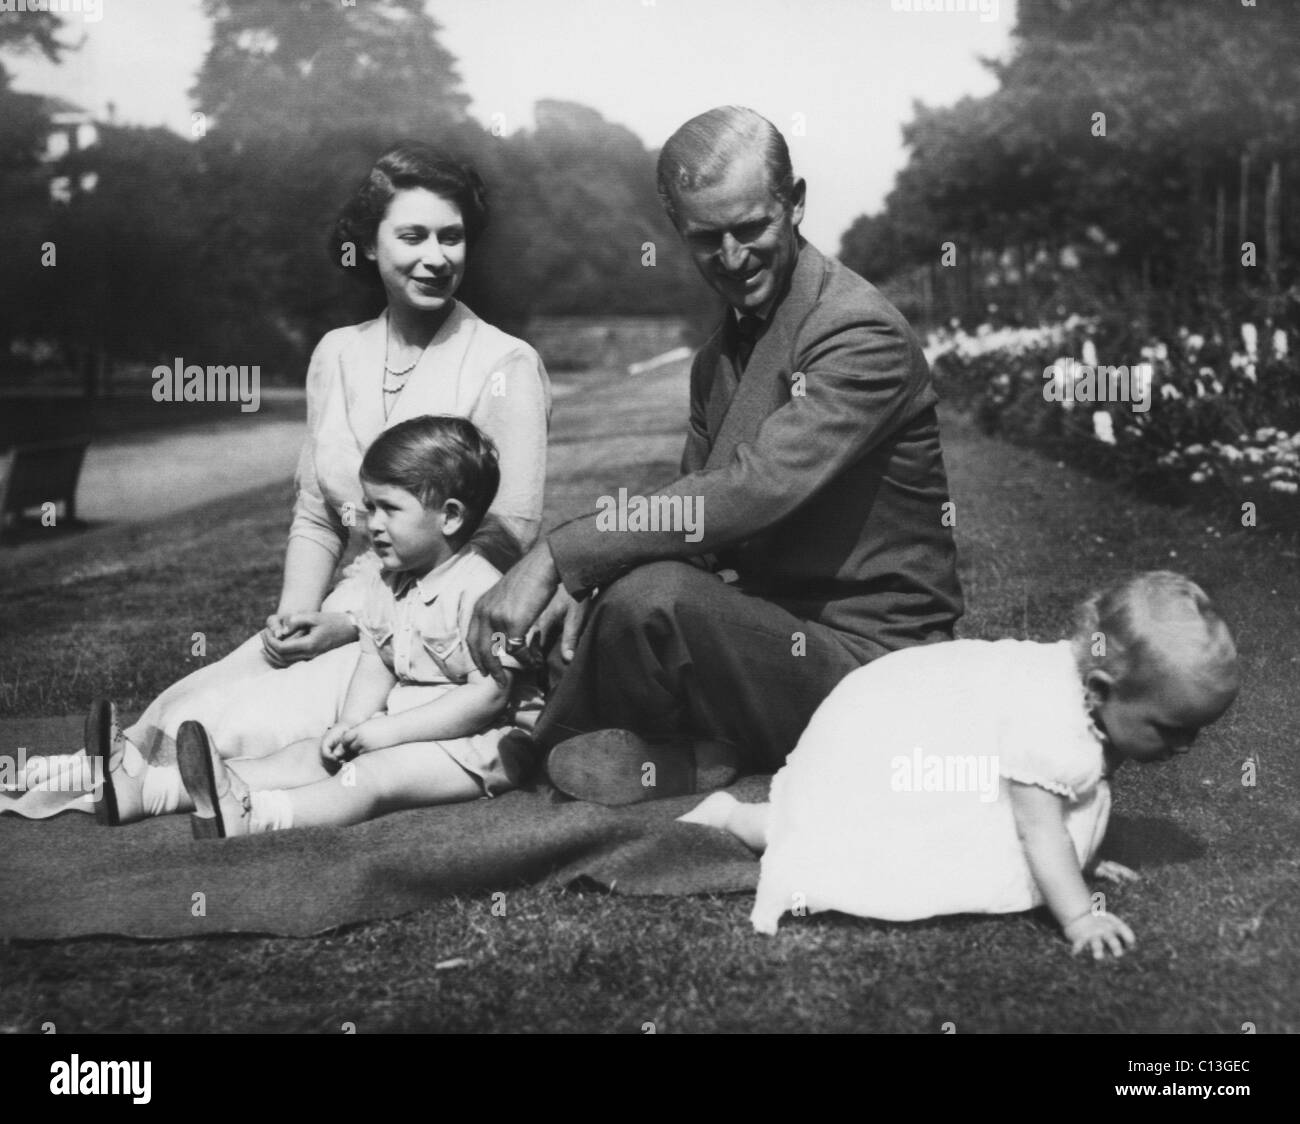 British Royal Family. From left: future Queen of England Princess Elizabeth, future Prince of Wales Prince Charles, Prince Philip, Duke of Edinburgh, future Princess Royal of England Princess Anne, London, England, 1951. Stock Photo